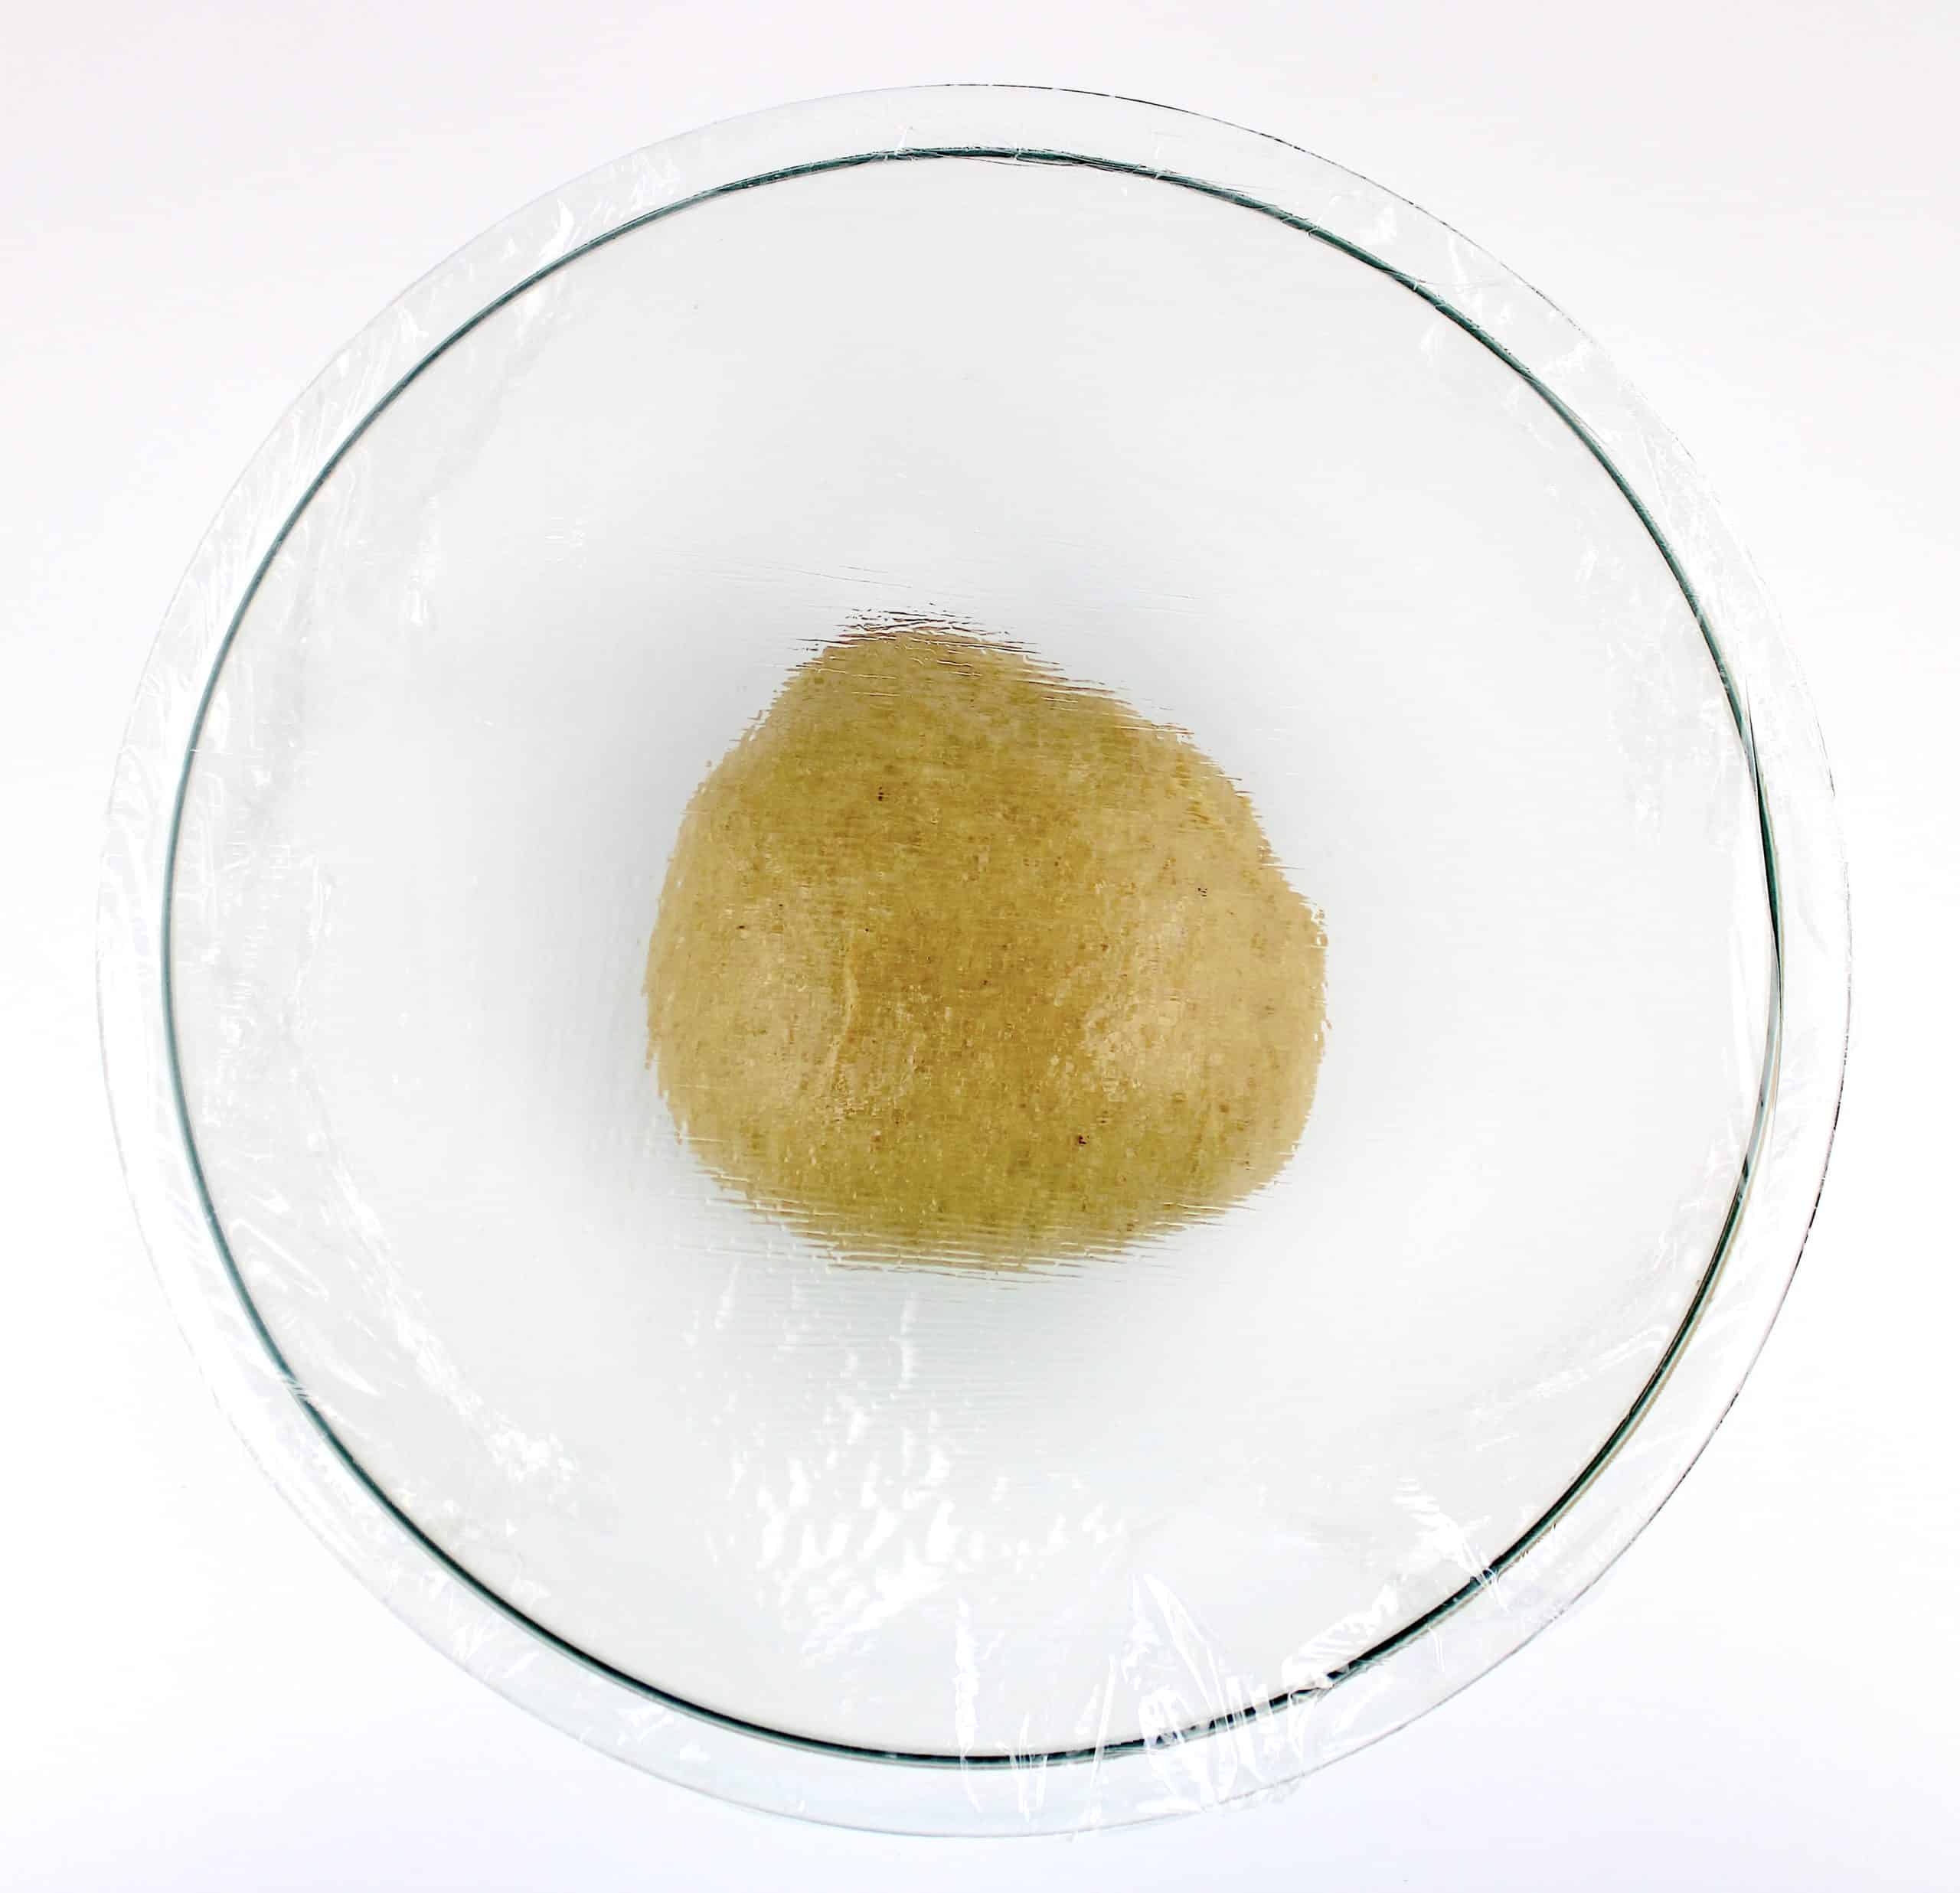 cinnamon roll dough ball in glass bowl with plastic wrap on top